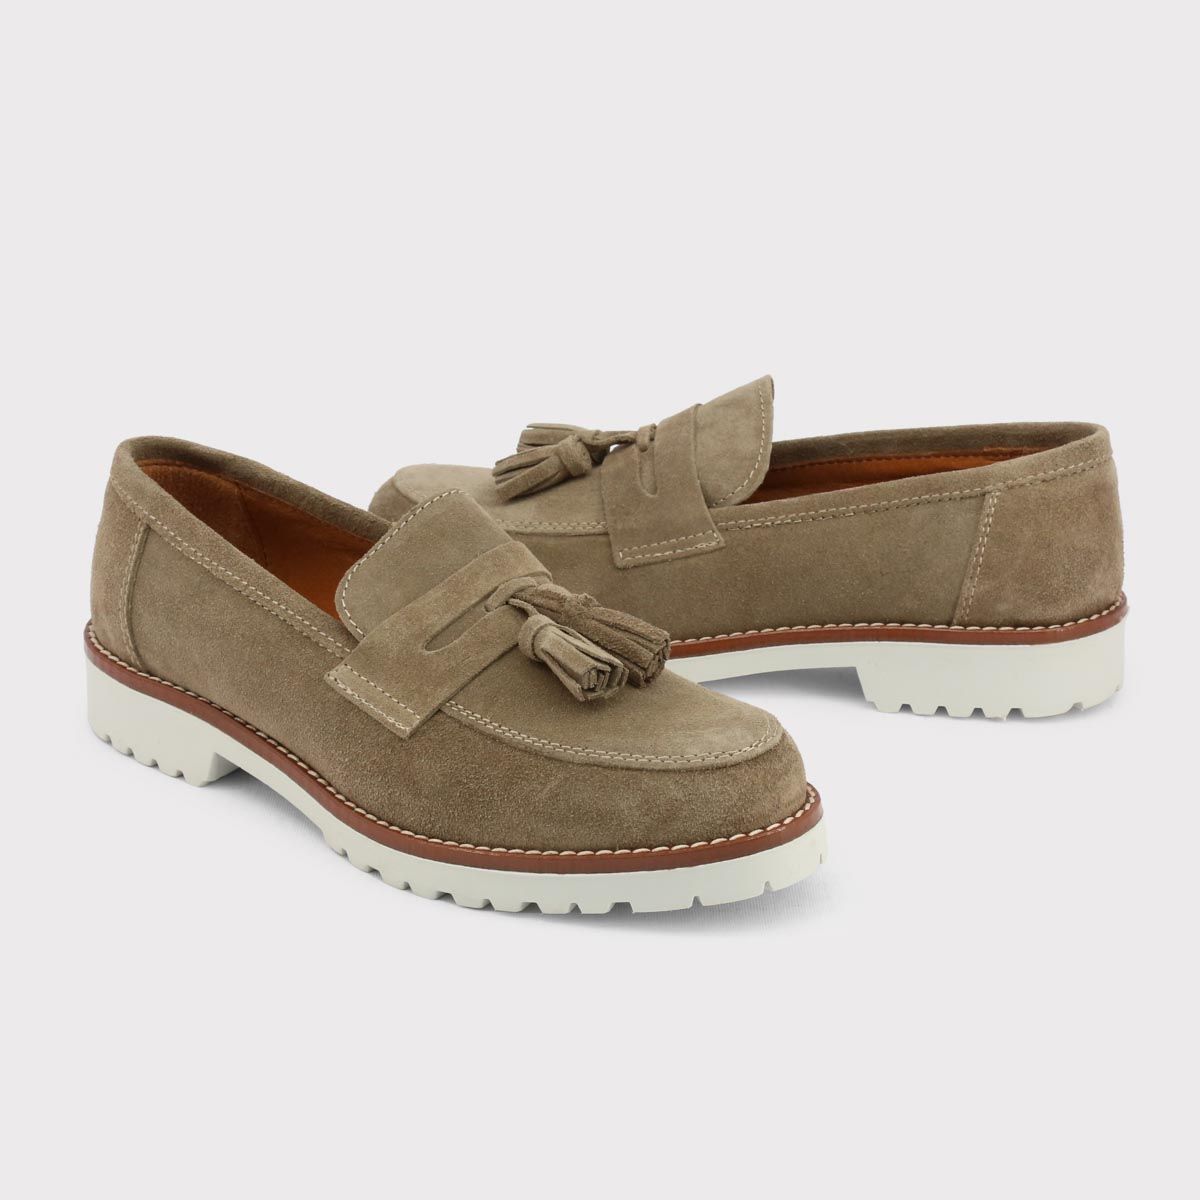 Made in: Italy <br> Collection: Spring/Summer <br> Gender: Woman <br> Type: Loafers <br> Upper: suede <br> Insole: leather <br> Internal lining: leather <br> Sole: rubber <br> Heel height cm: 3 <br> Details: tassels, round toe